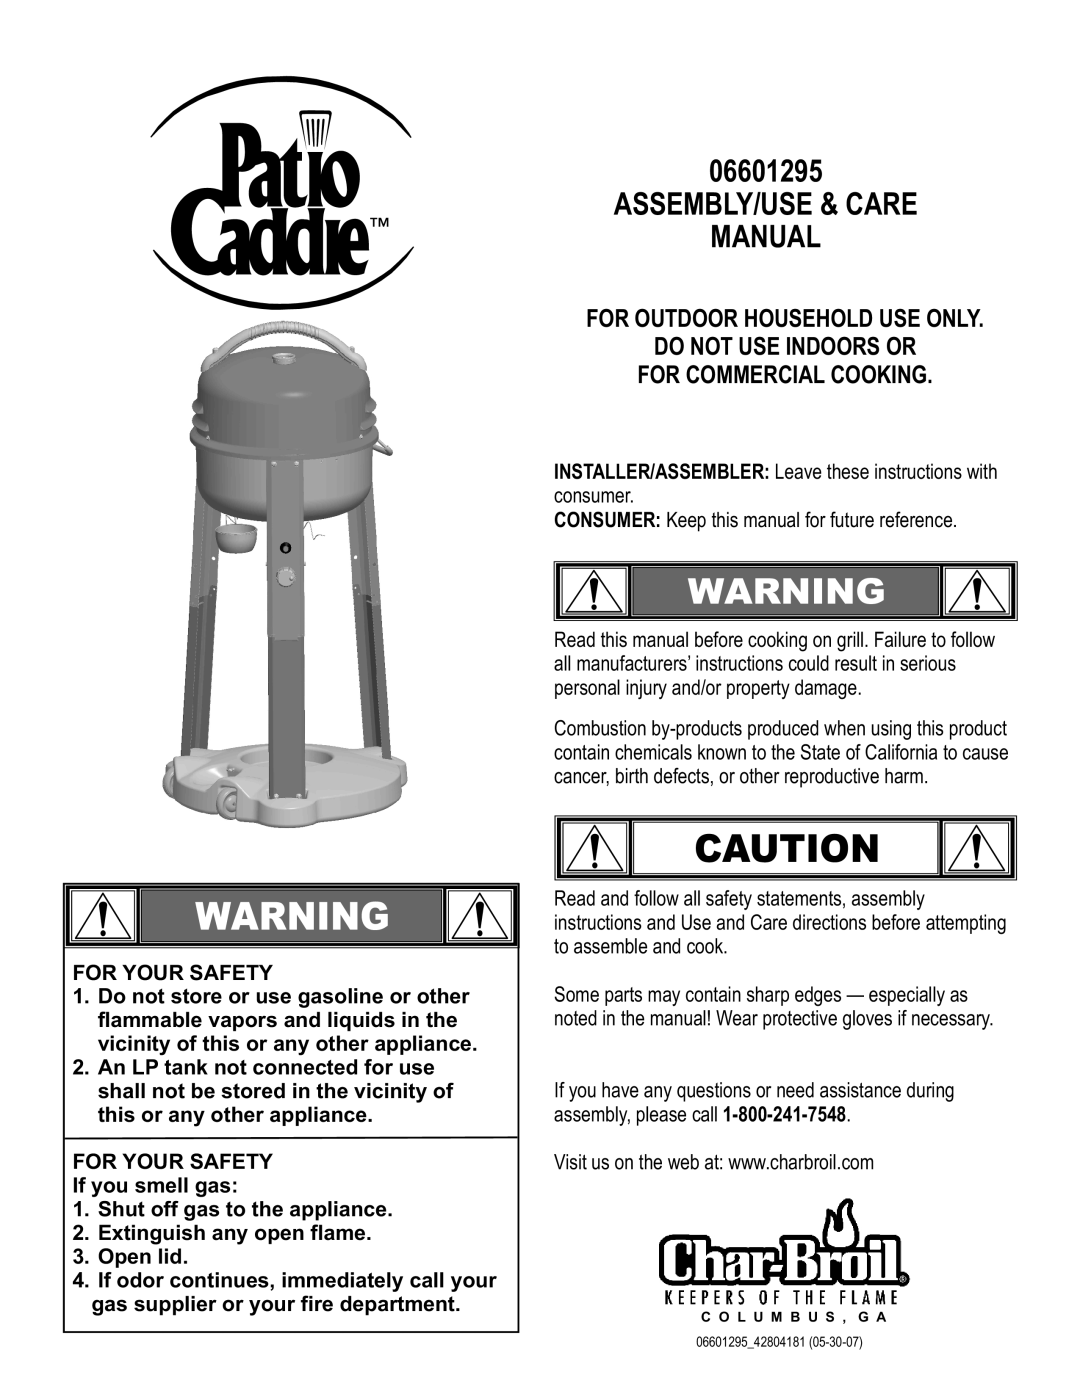 Char-Broil 06601295 manual Assembly/Use & Care Manual, For Outdoor Household Use Only Do Not Use Indoors Or 